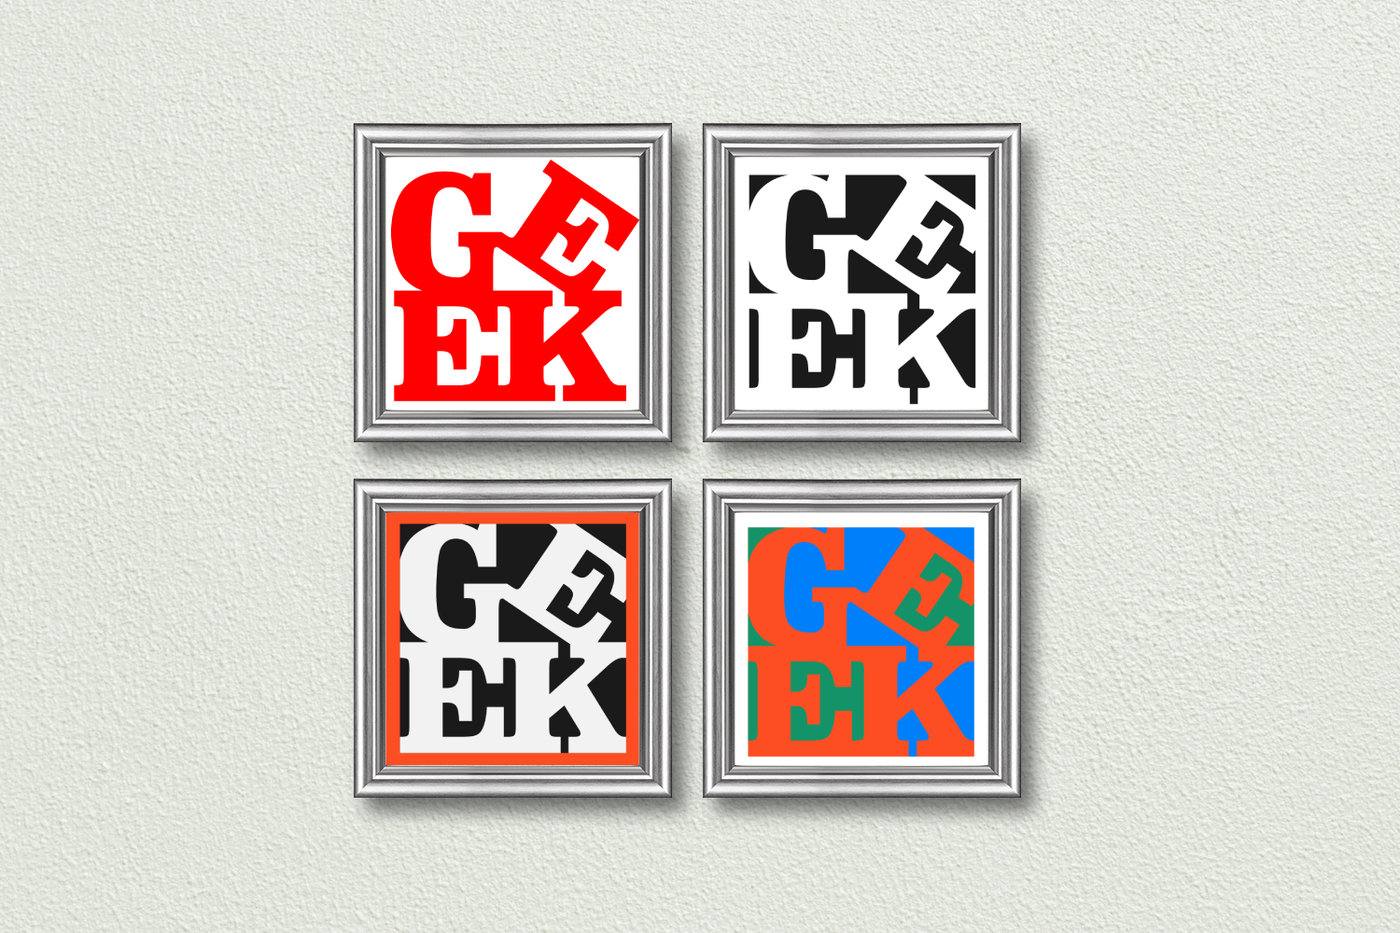 For framed square prints. Each has the word "GEEK" set on a square with the first E tilted.